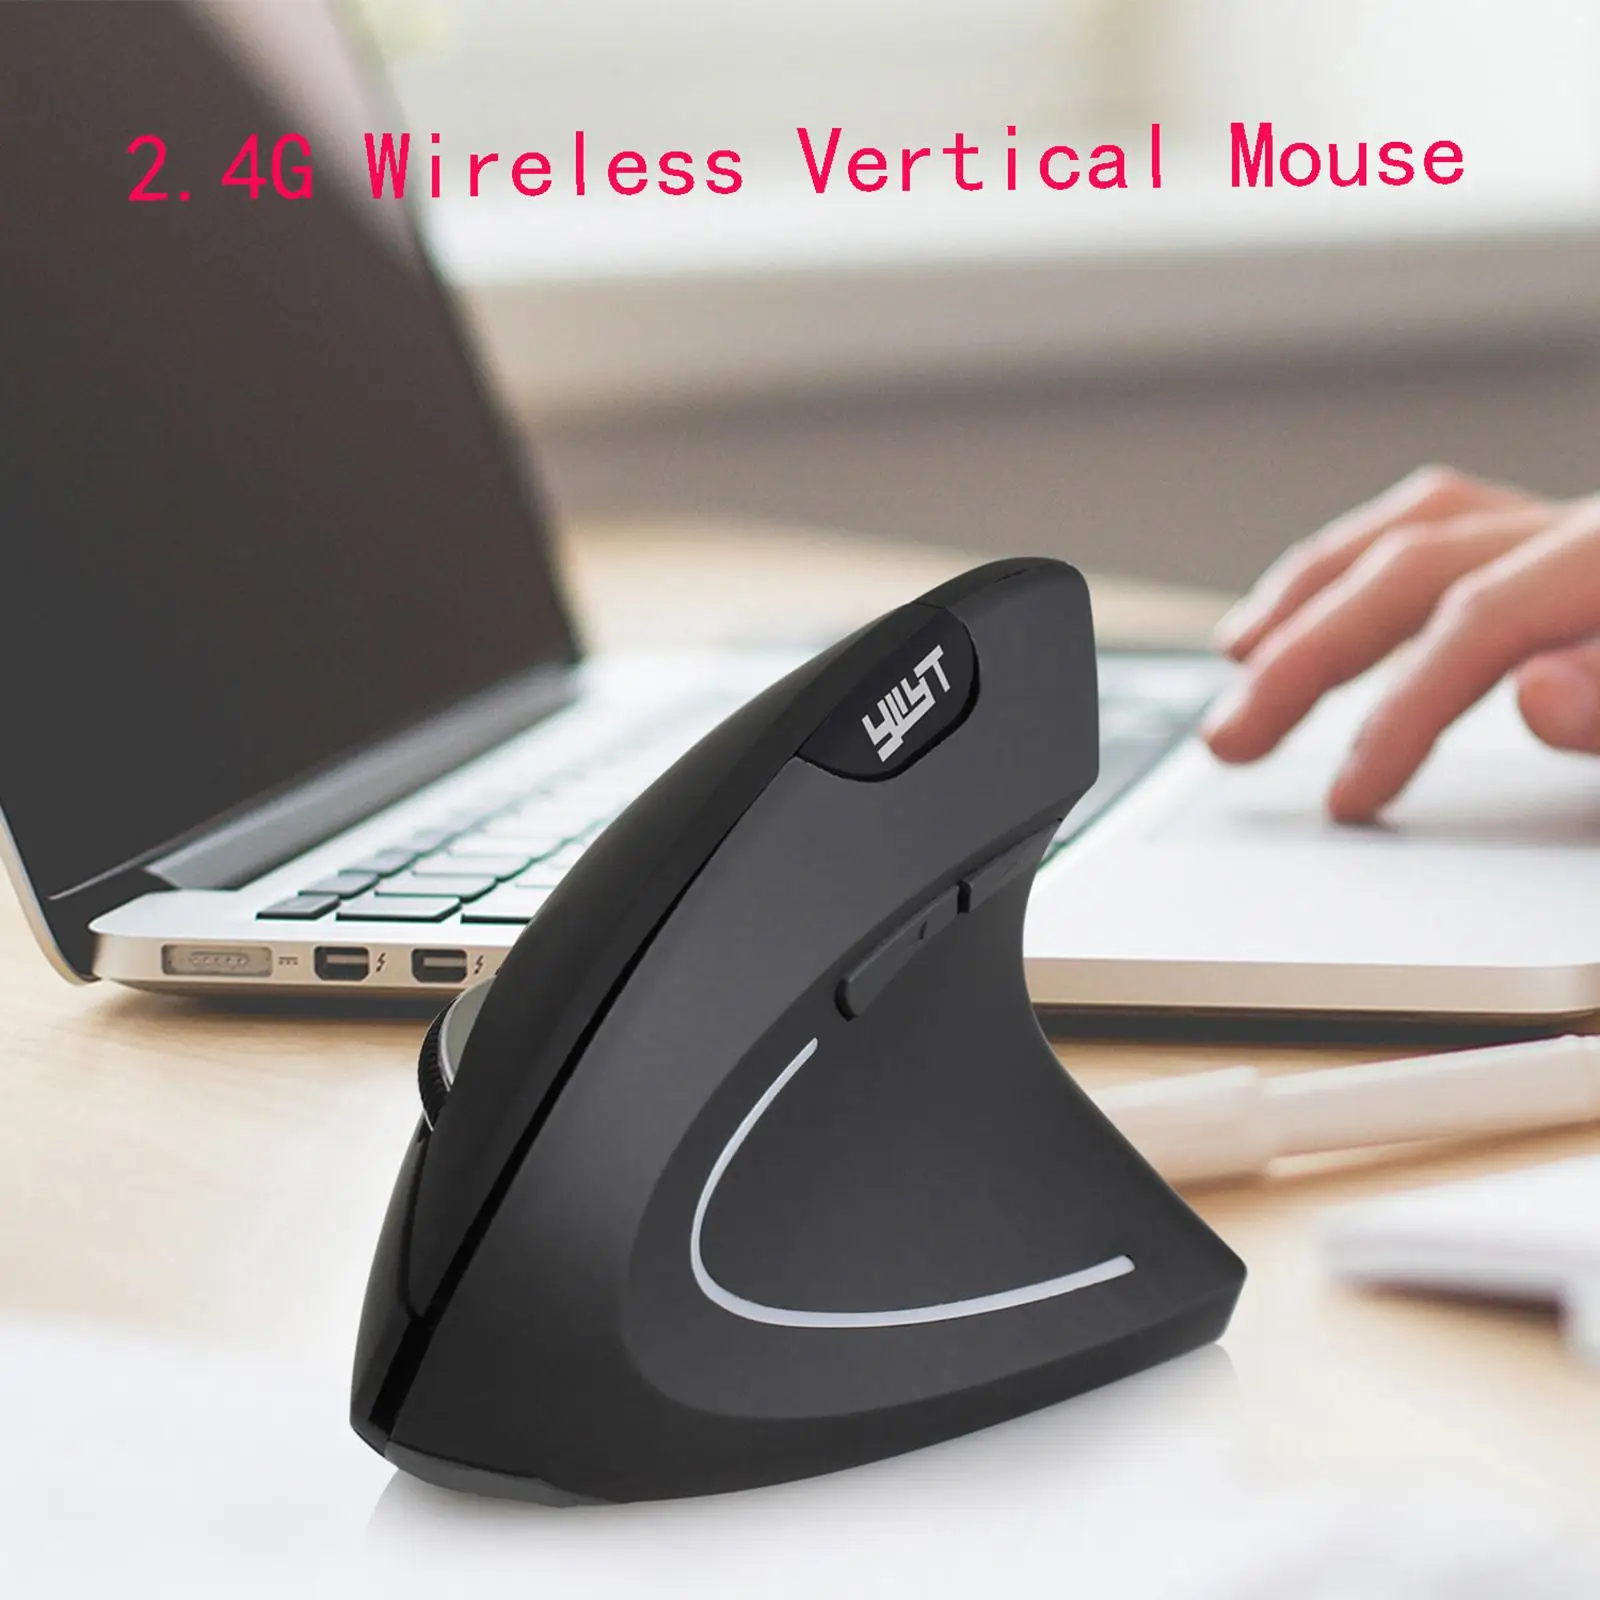 Vertical Mouse w/ USB Receiver 6 Buttons Small Mice for Laptop Desktop PC Reduce Wrist Pain 4 Adjustable DPI